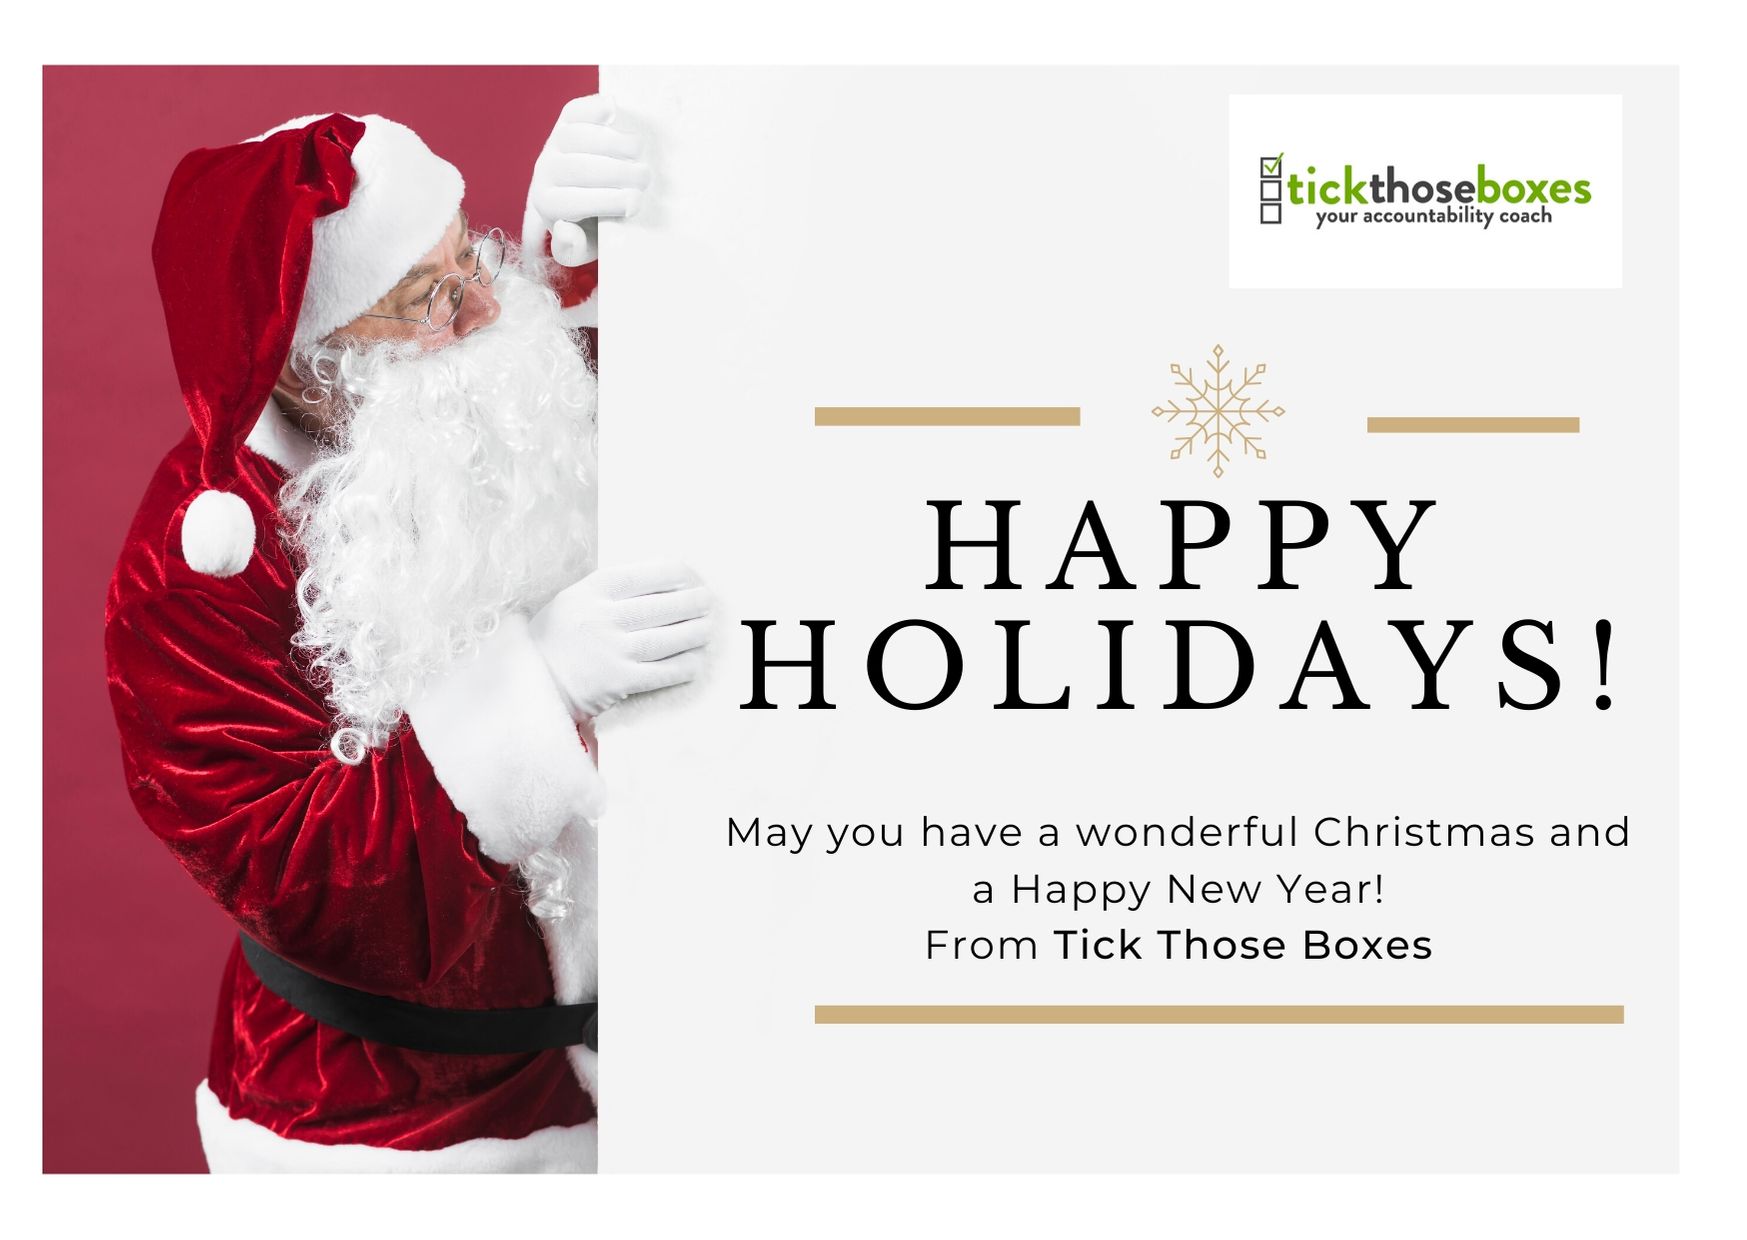 May you have a wonderful Christmas and a happy new year! From Tick Those Boxes (1)